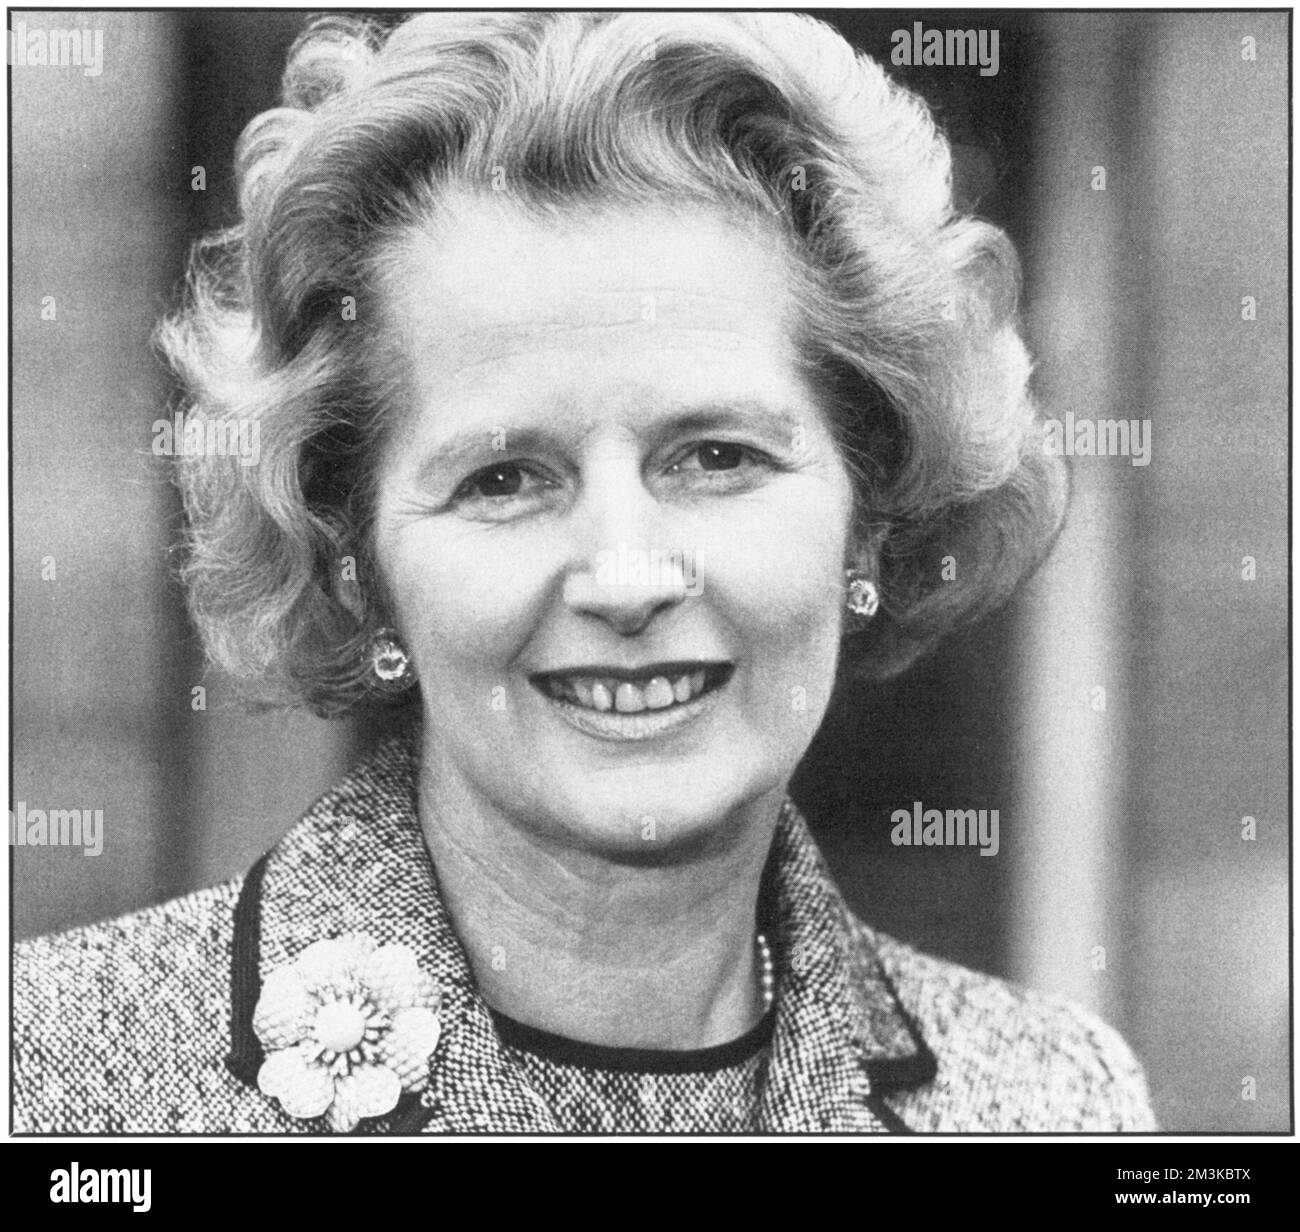 MARGARET THATCHER nee ROBERTS First woman to be British Prime Minister (Conservative) 1979-90. Shown here in 1975 at the time of her election as leader of the Conservative party.     Date: 1975 Stock Photo